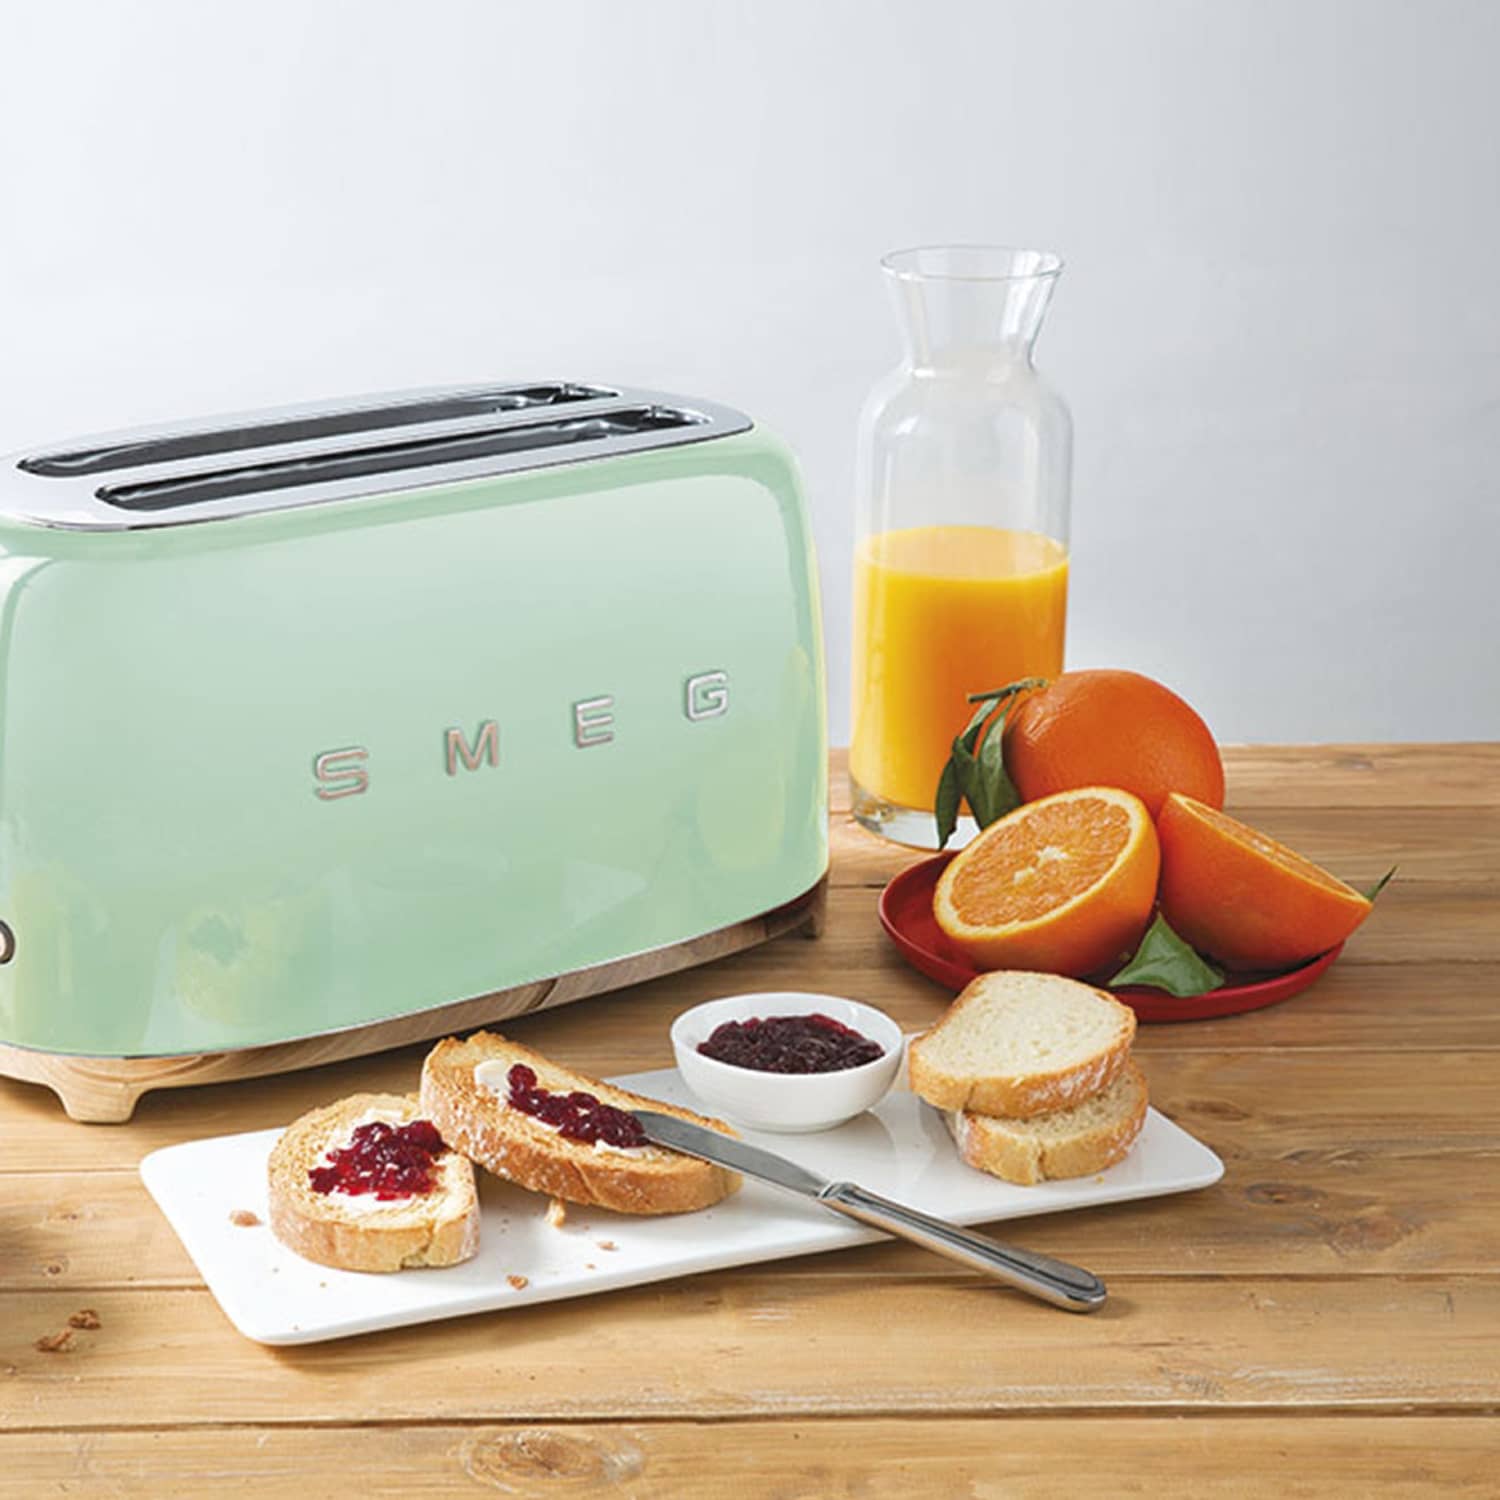 7 Best Toasters of 2019 - Top Toaster Reviews